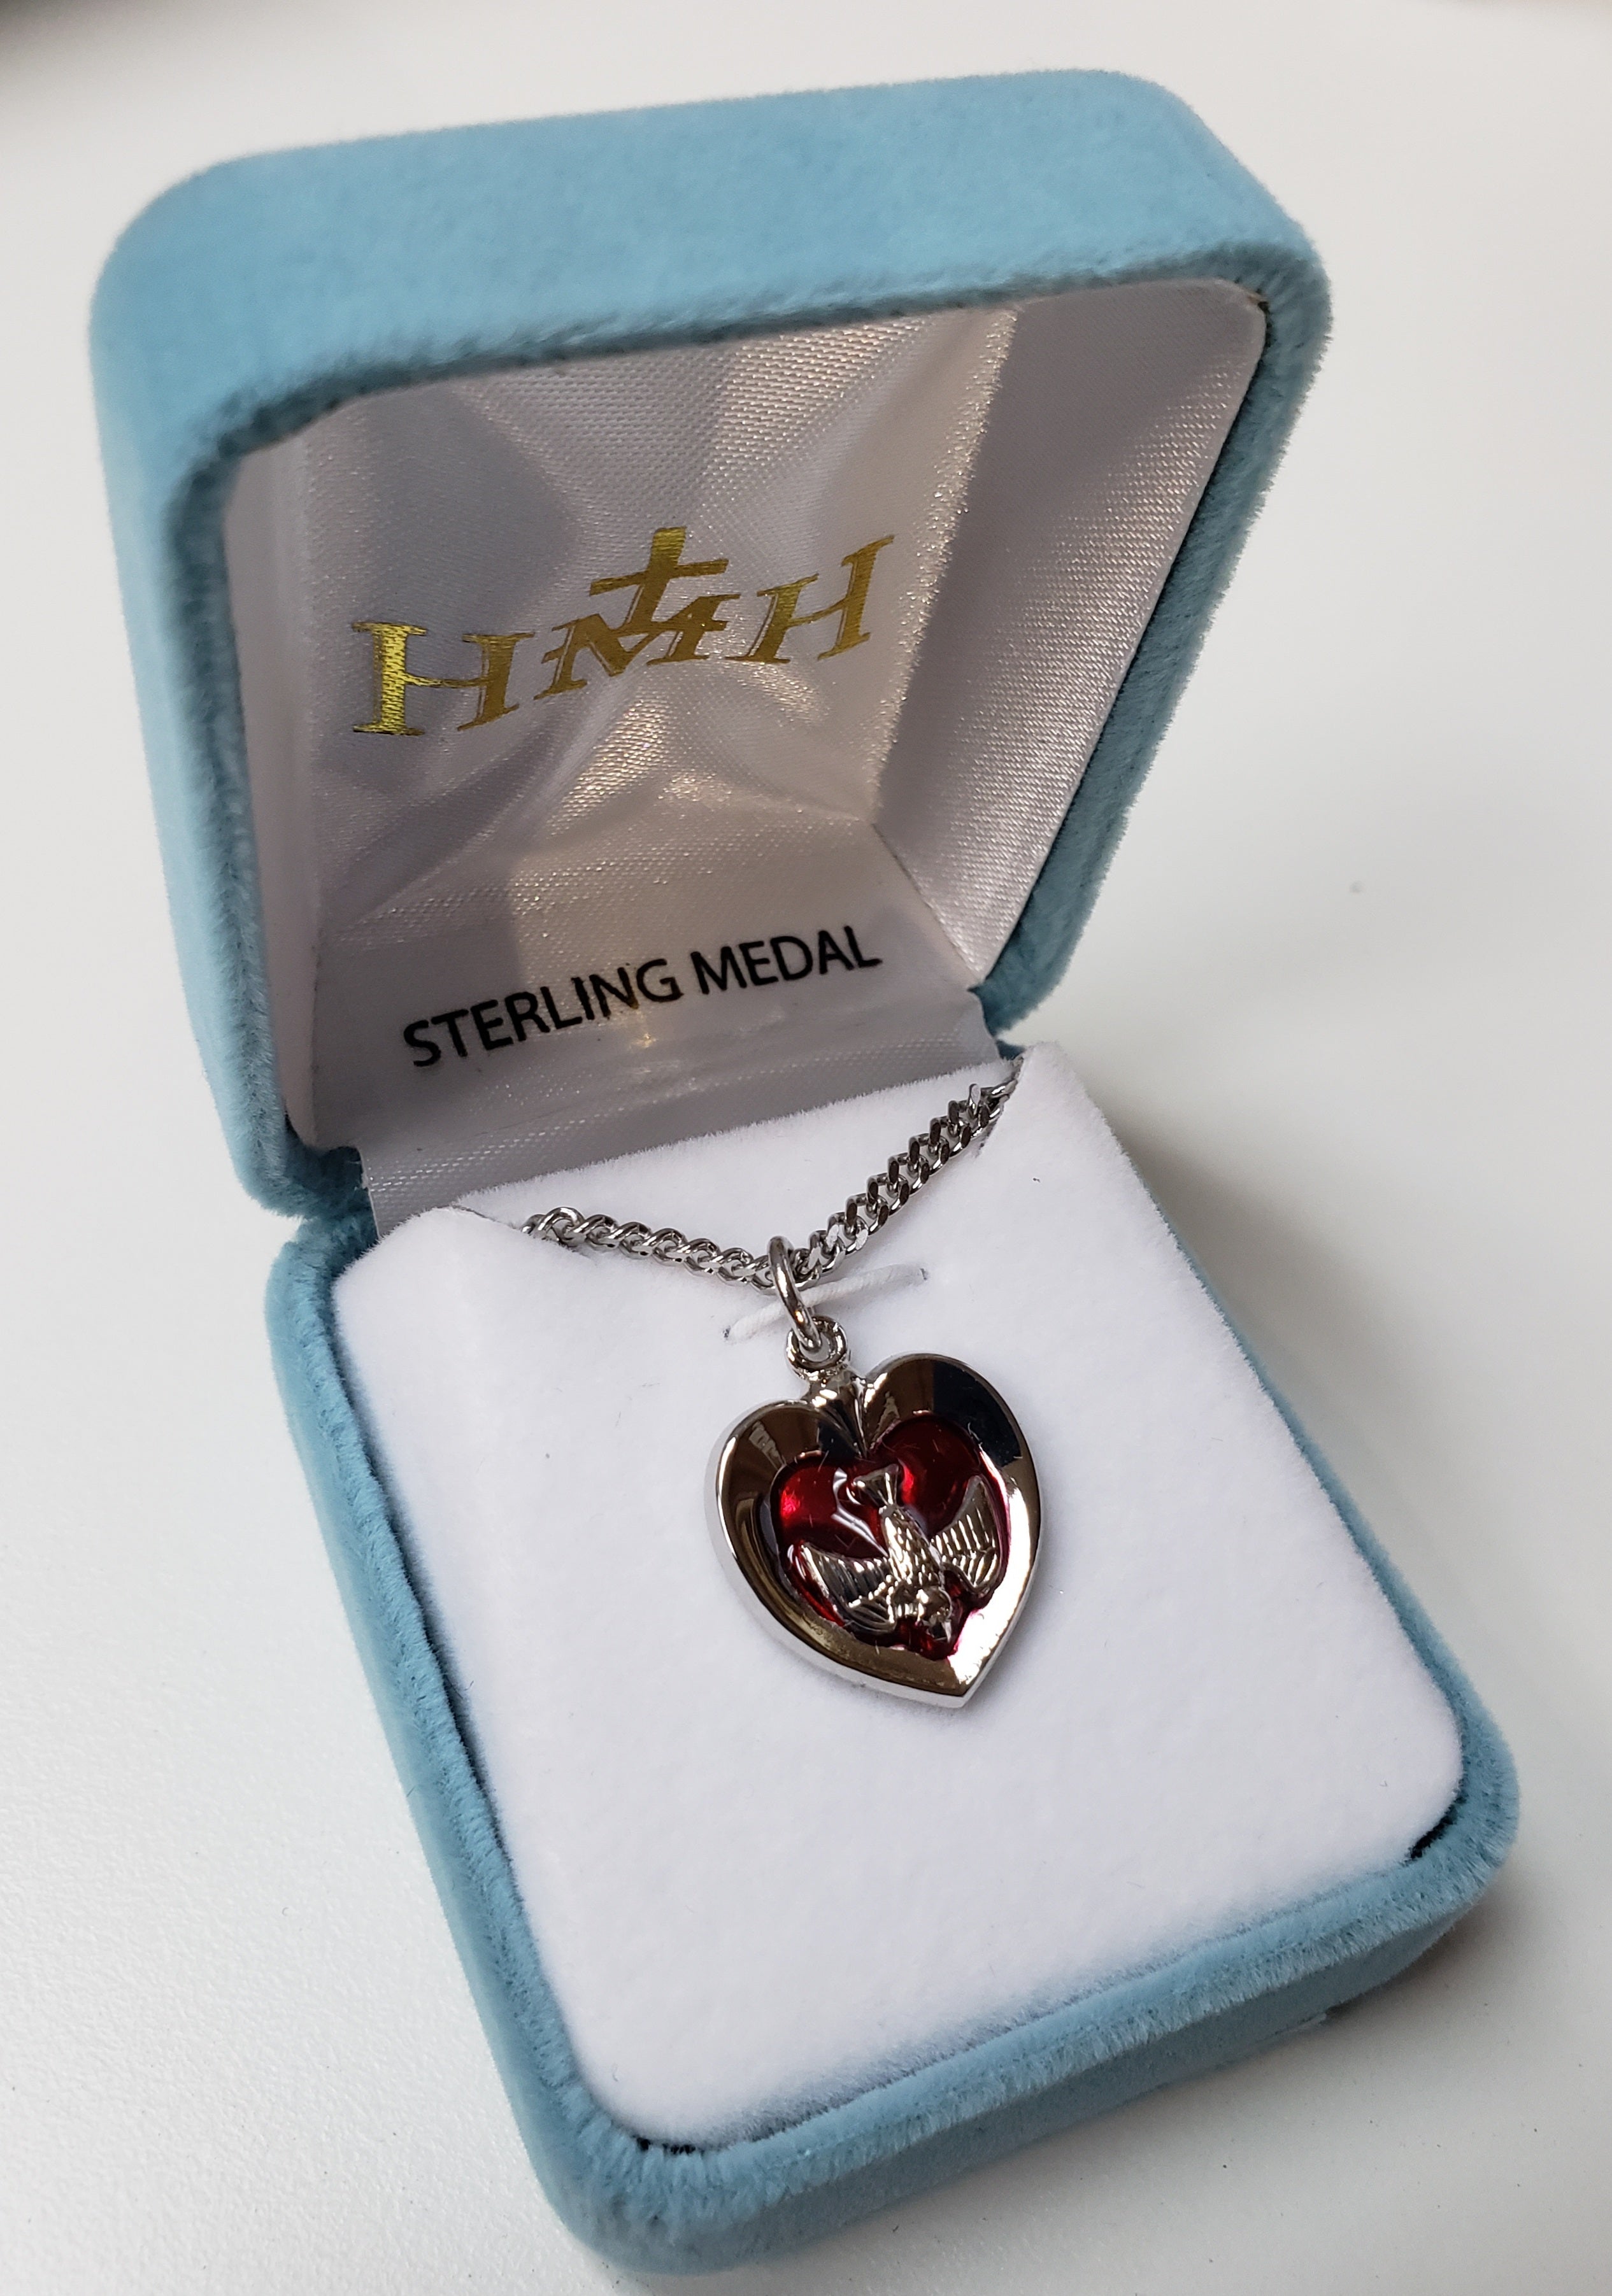 Collection Sterling Silver Polished Heart Locket Pendant Necklace